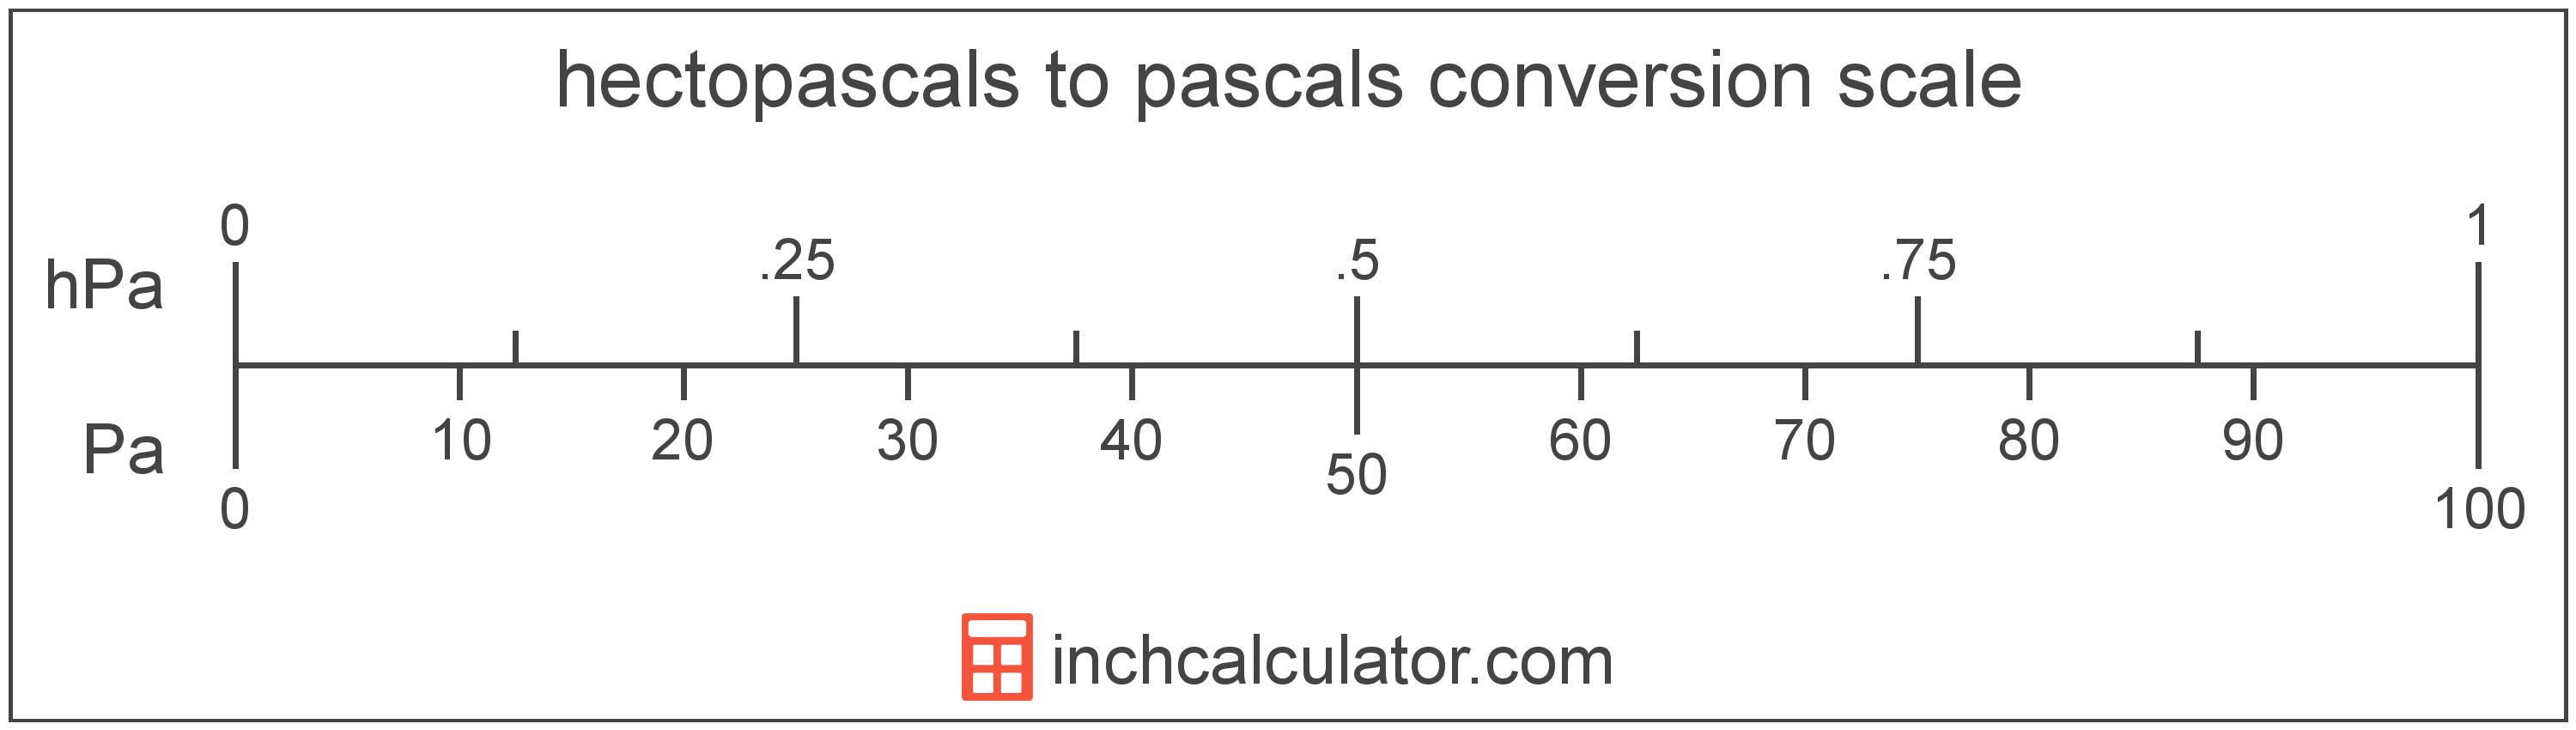 conversion scale showing pascals and equivalent hectopascals pressure values